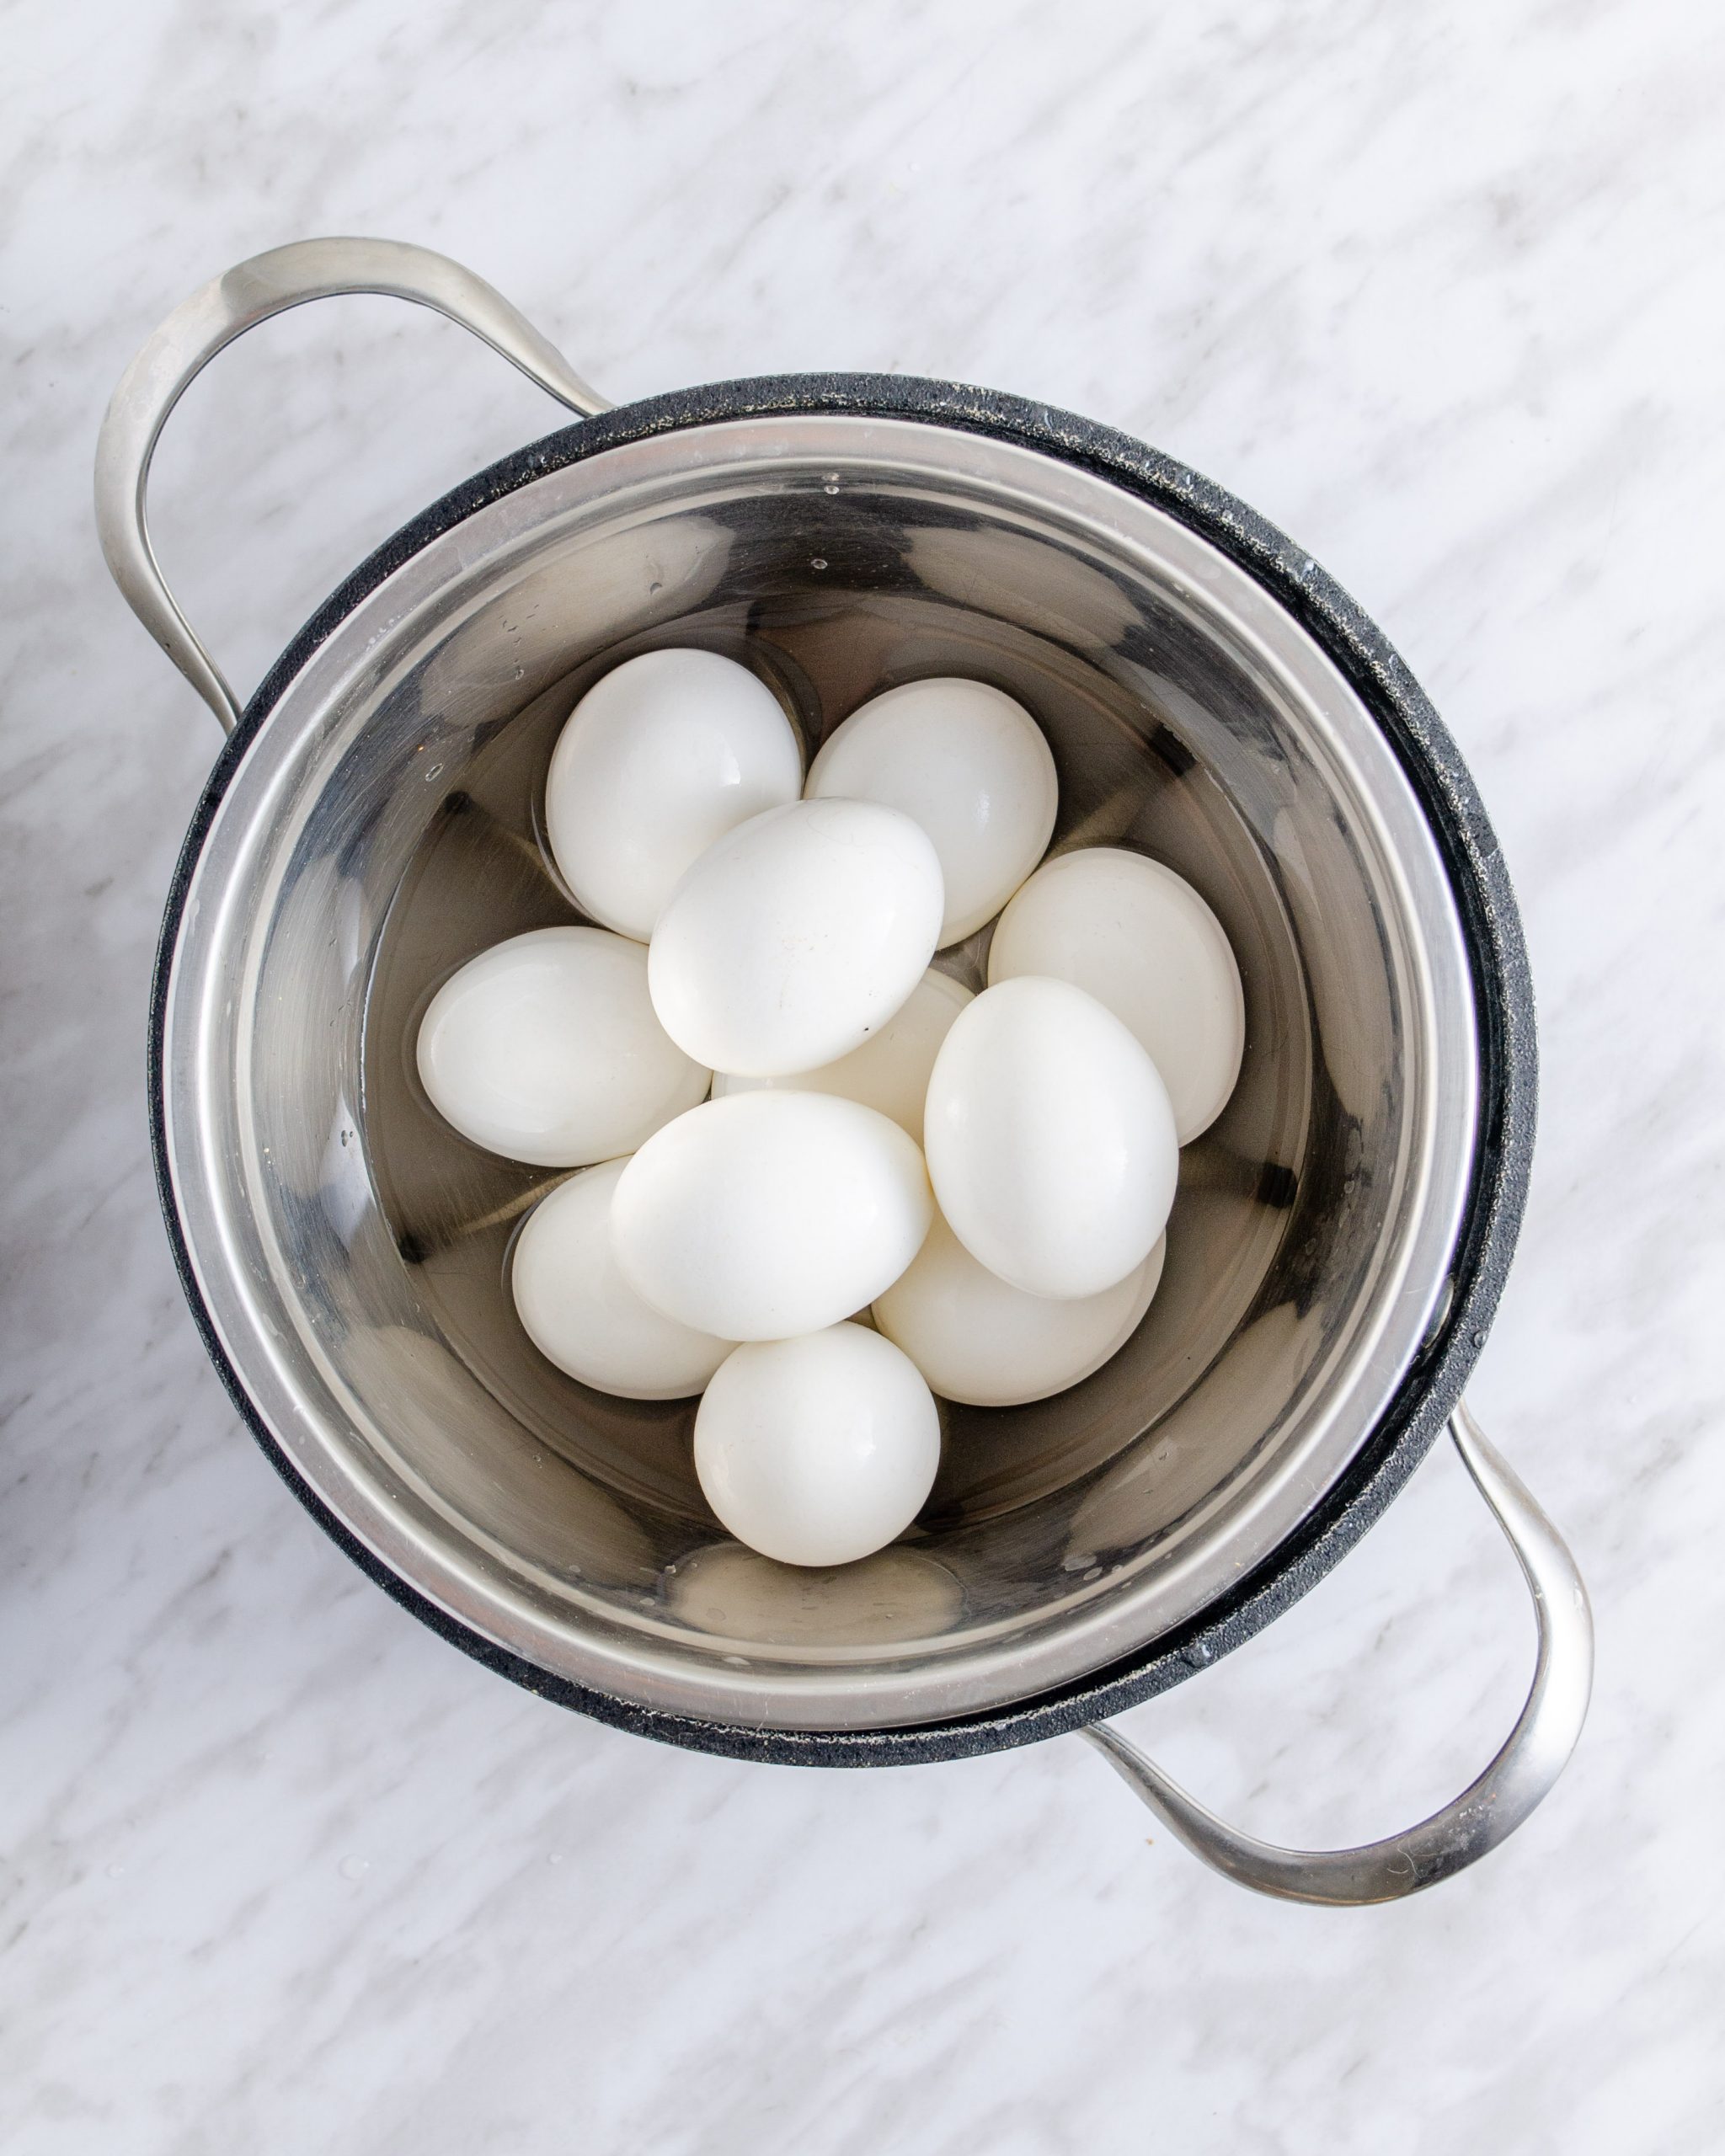 Place a trivet into the instant pot and pile your eggs onto the trivet